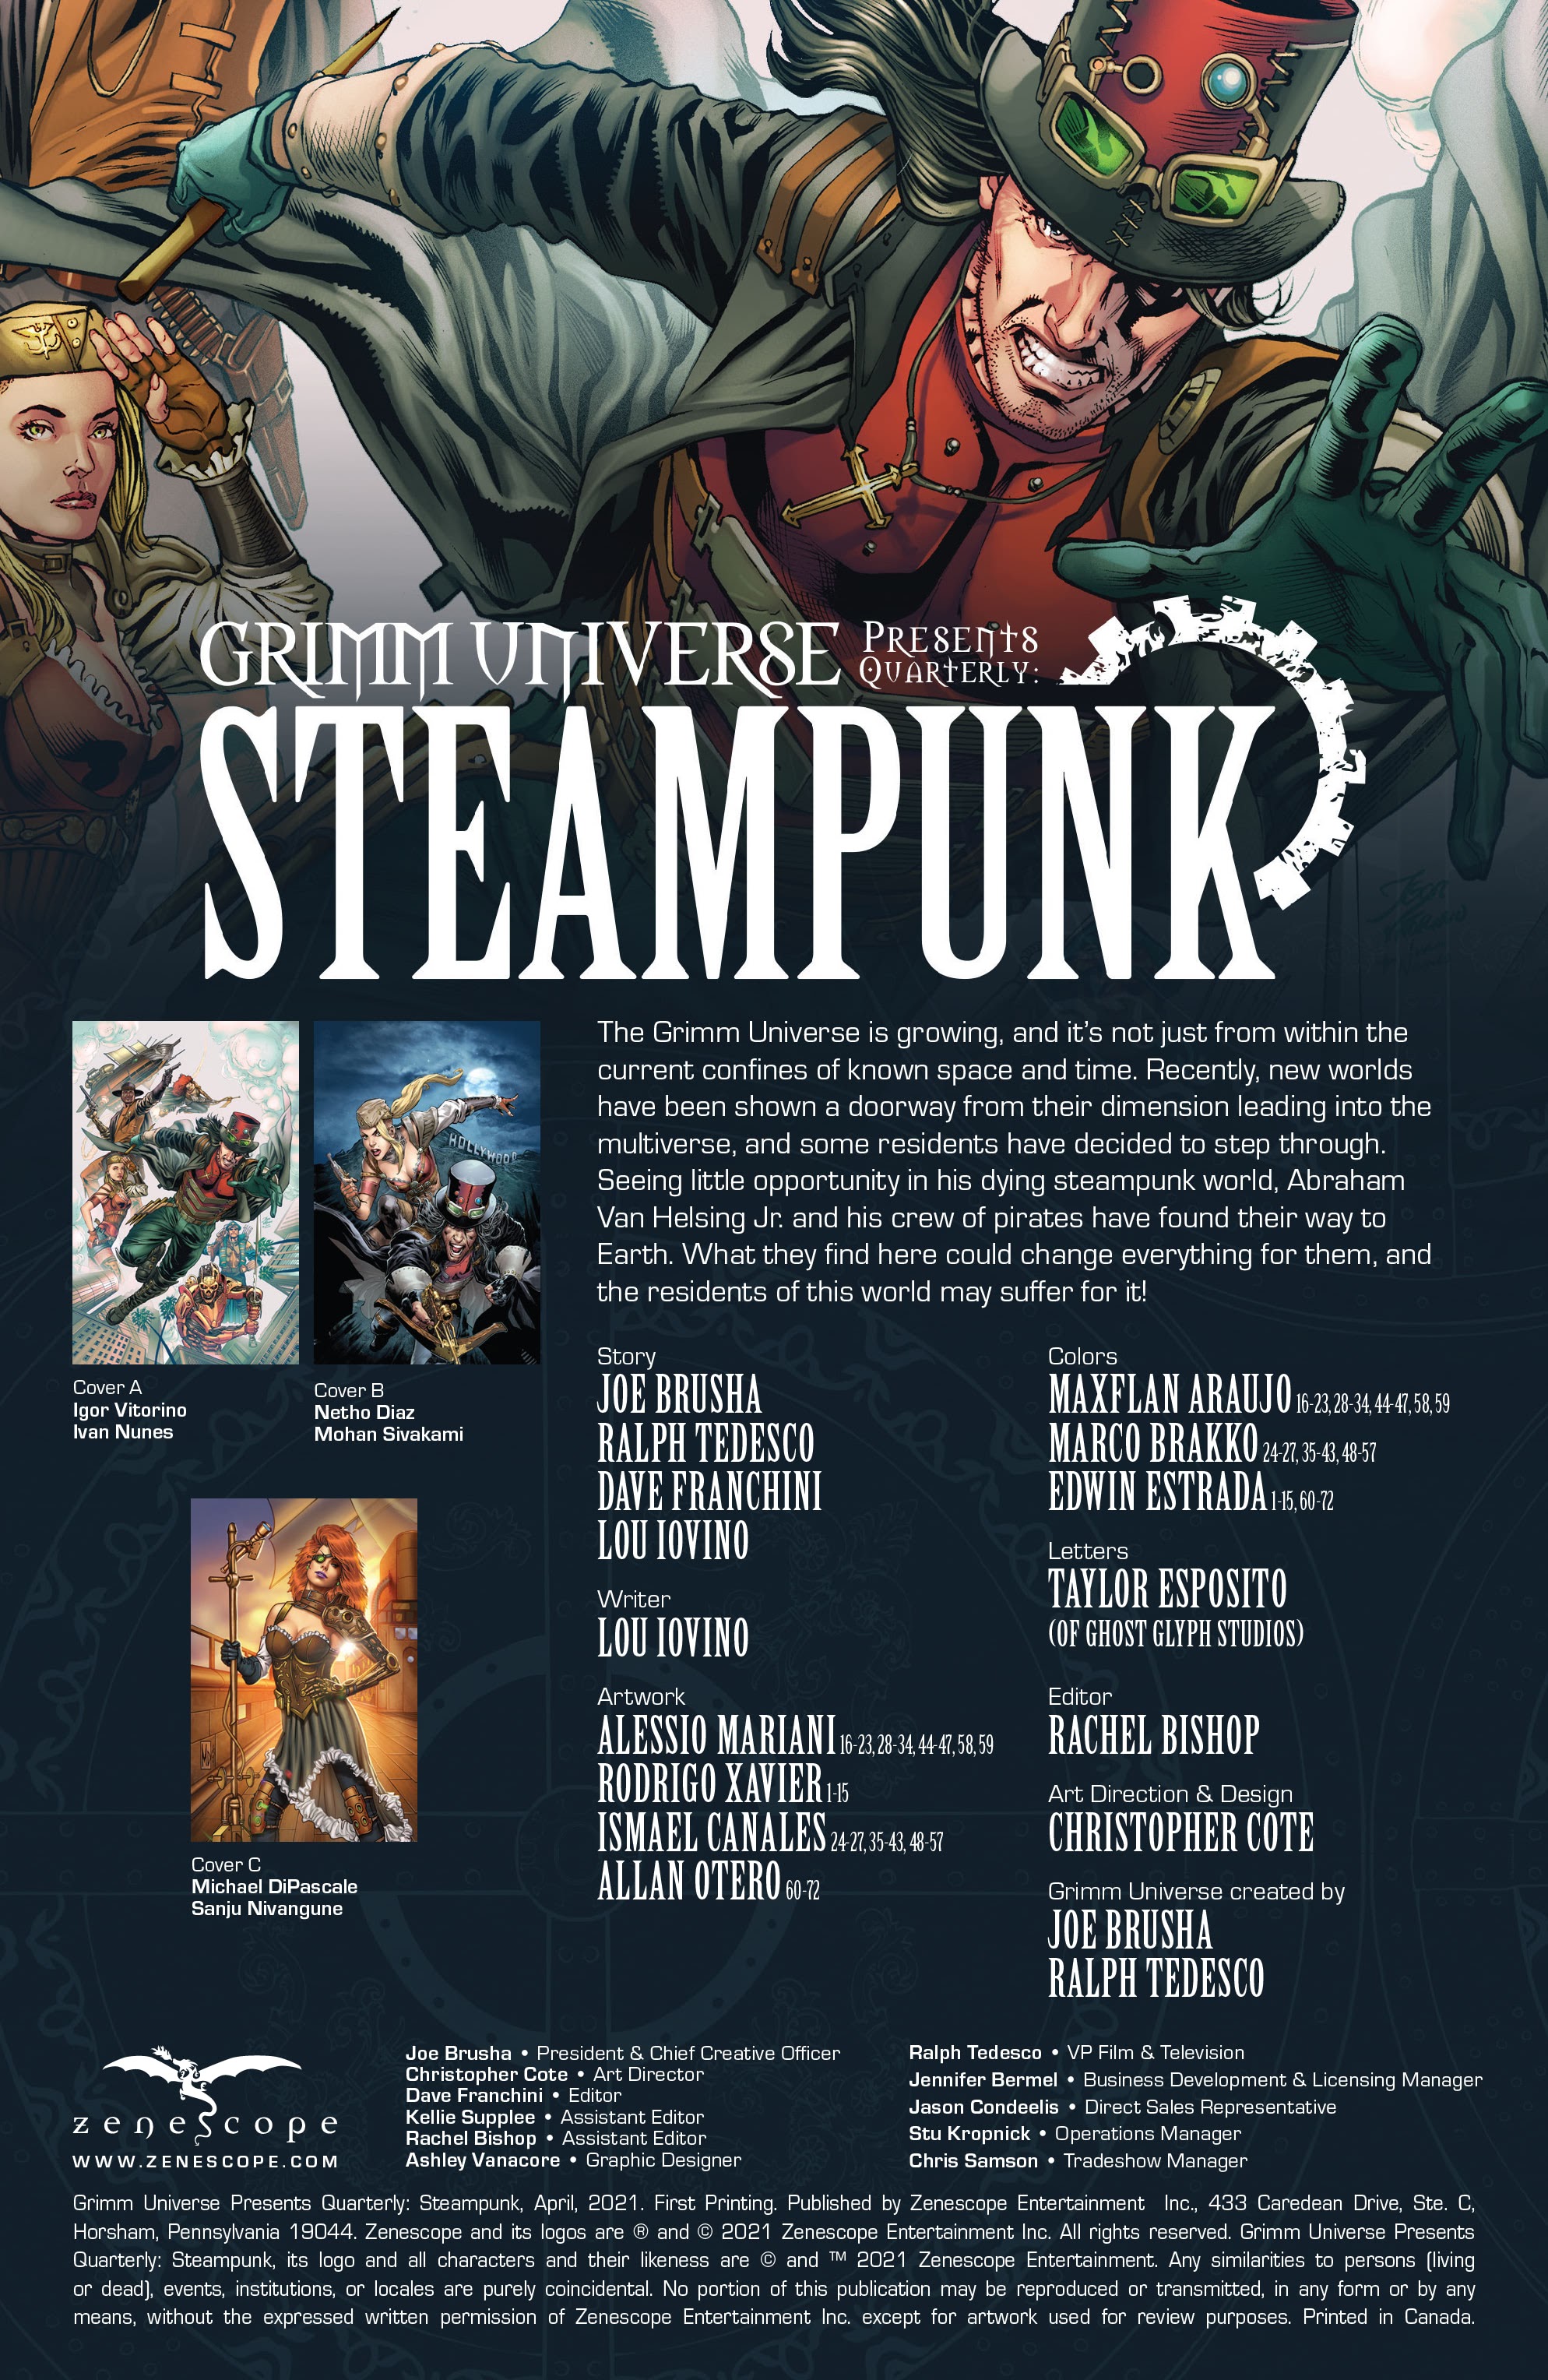 Read online Grimm Universe Presents Quarterly: Steampunk comic -  Issue # TPB - 2